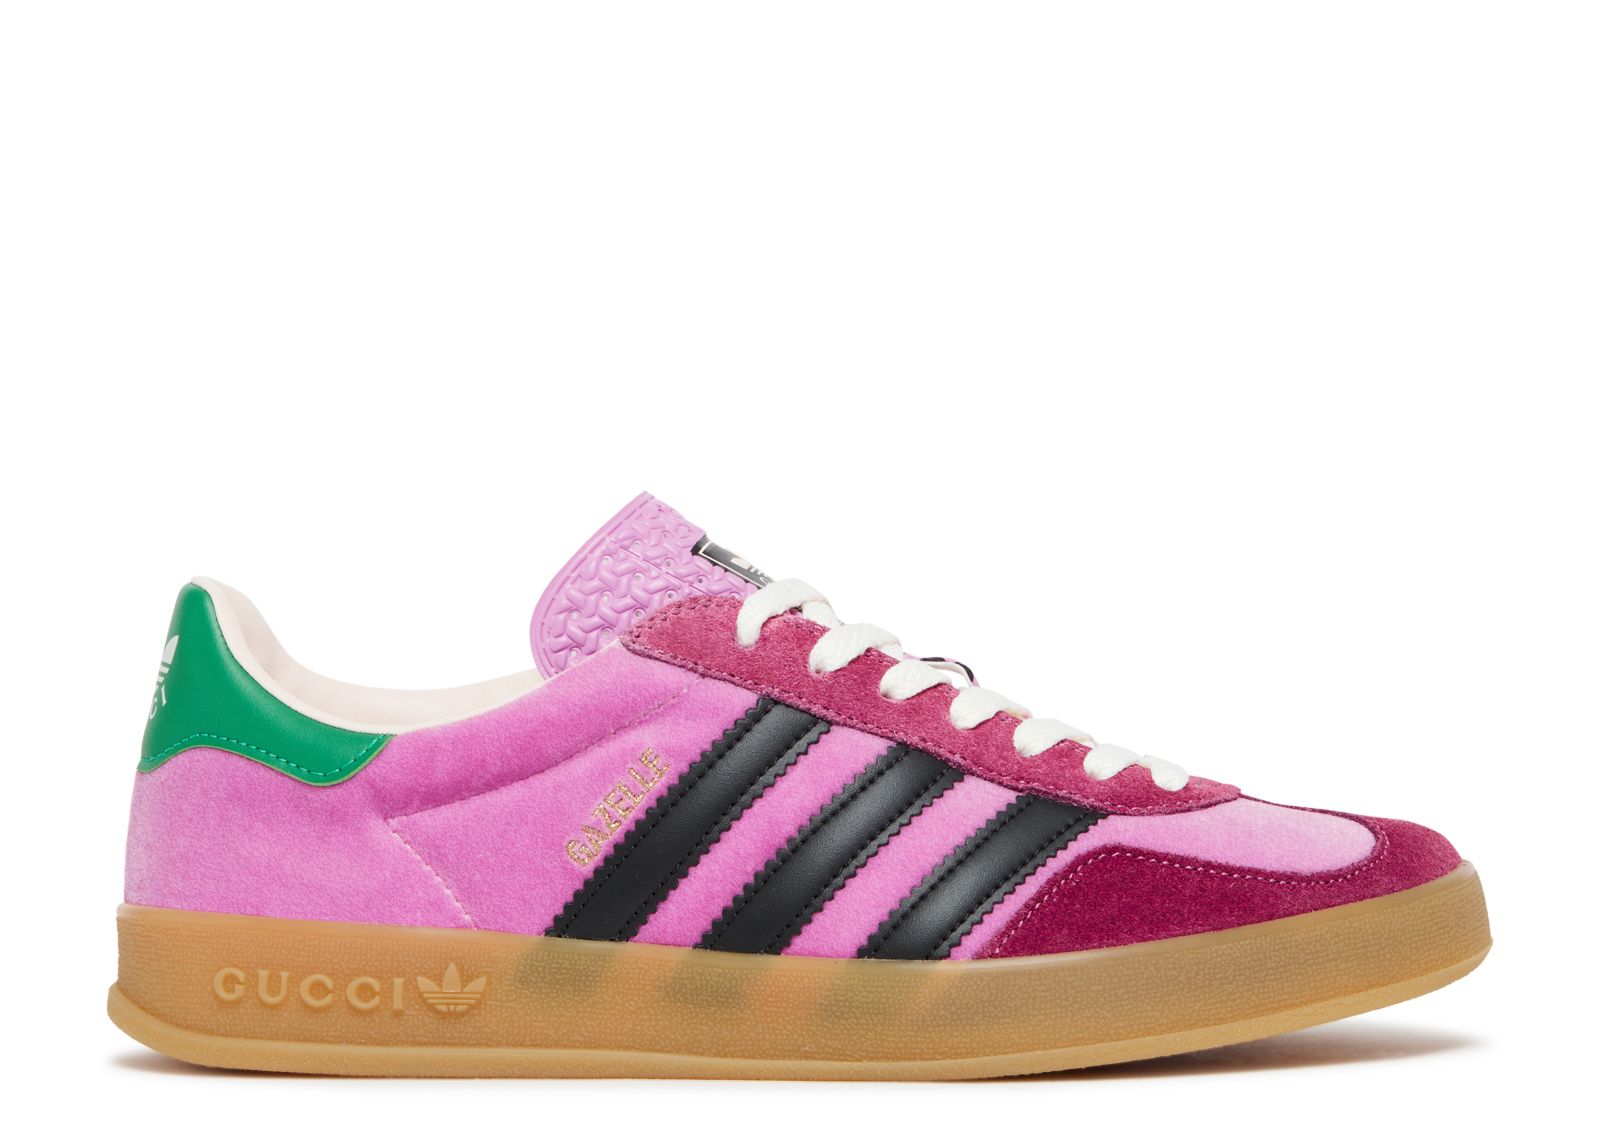 adidas x Gucci women's ZX8000 sneaker in pink leather